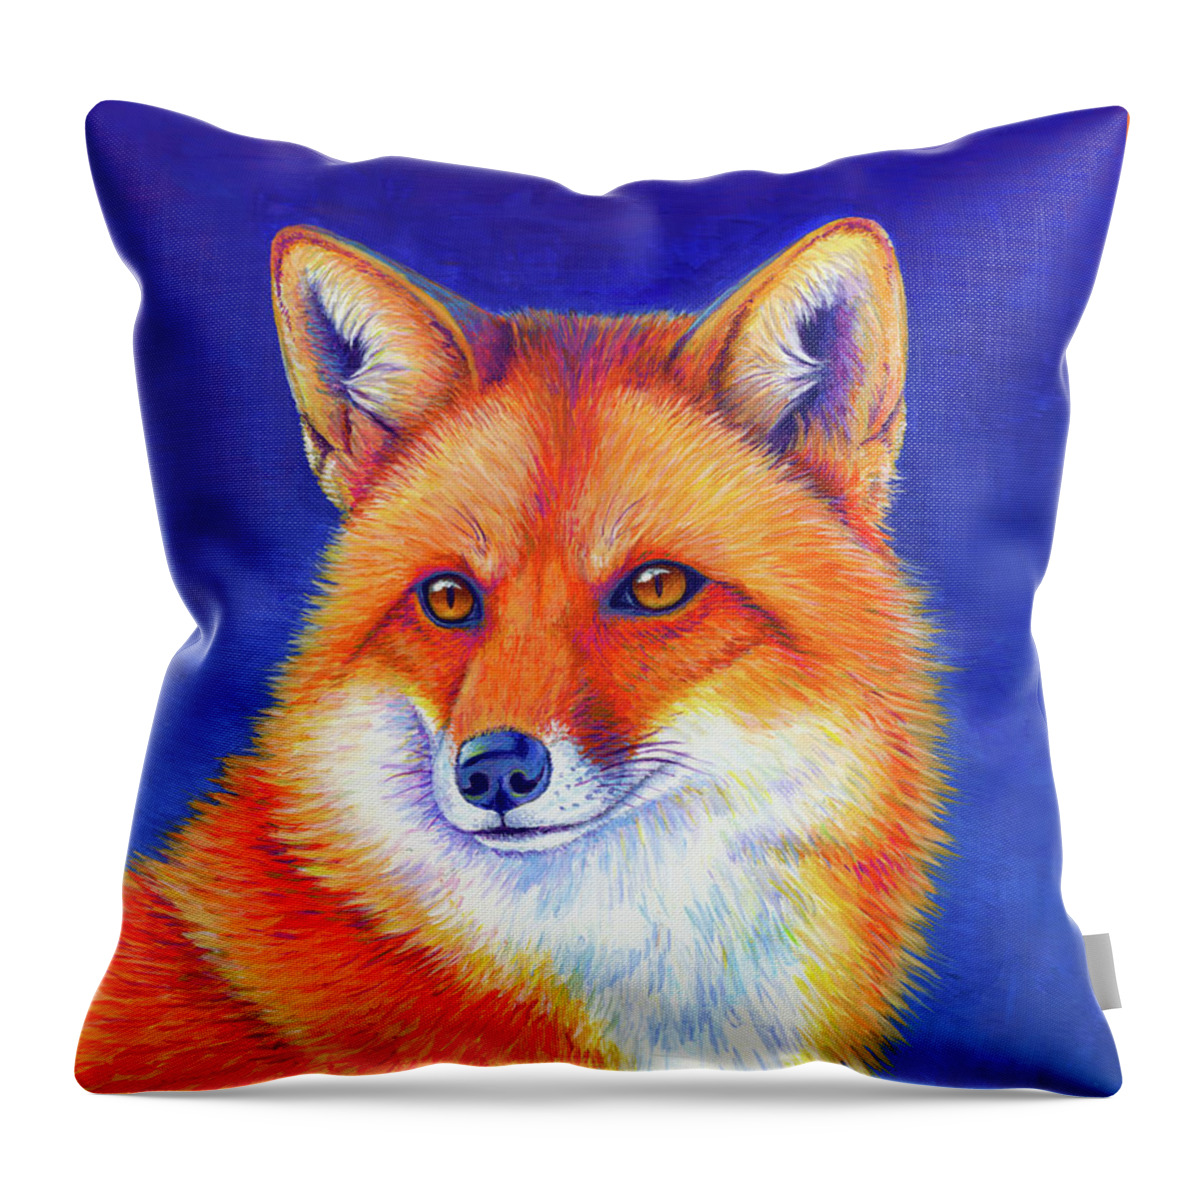 Red Fox Throw Pillow featuring the painting Vibrant Flame - Colorful Red Fox by Rebecca Wang